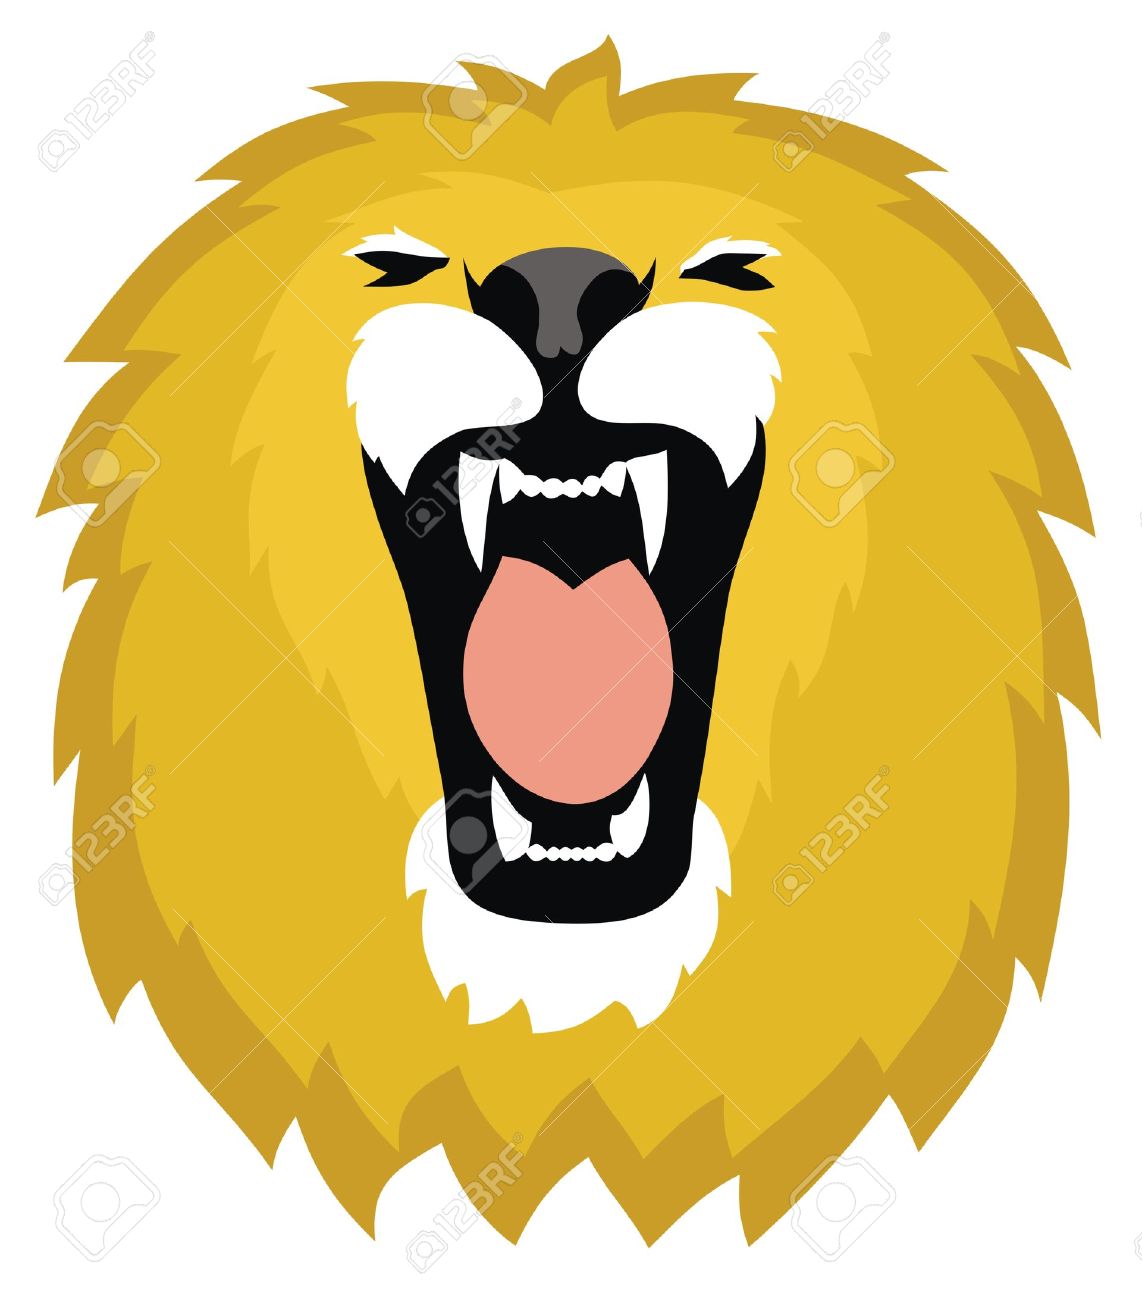 Roaring free download best. Clipart lion open mouth